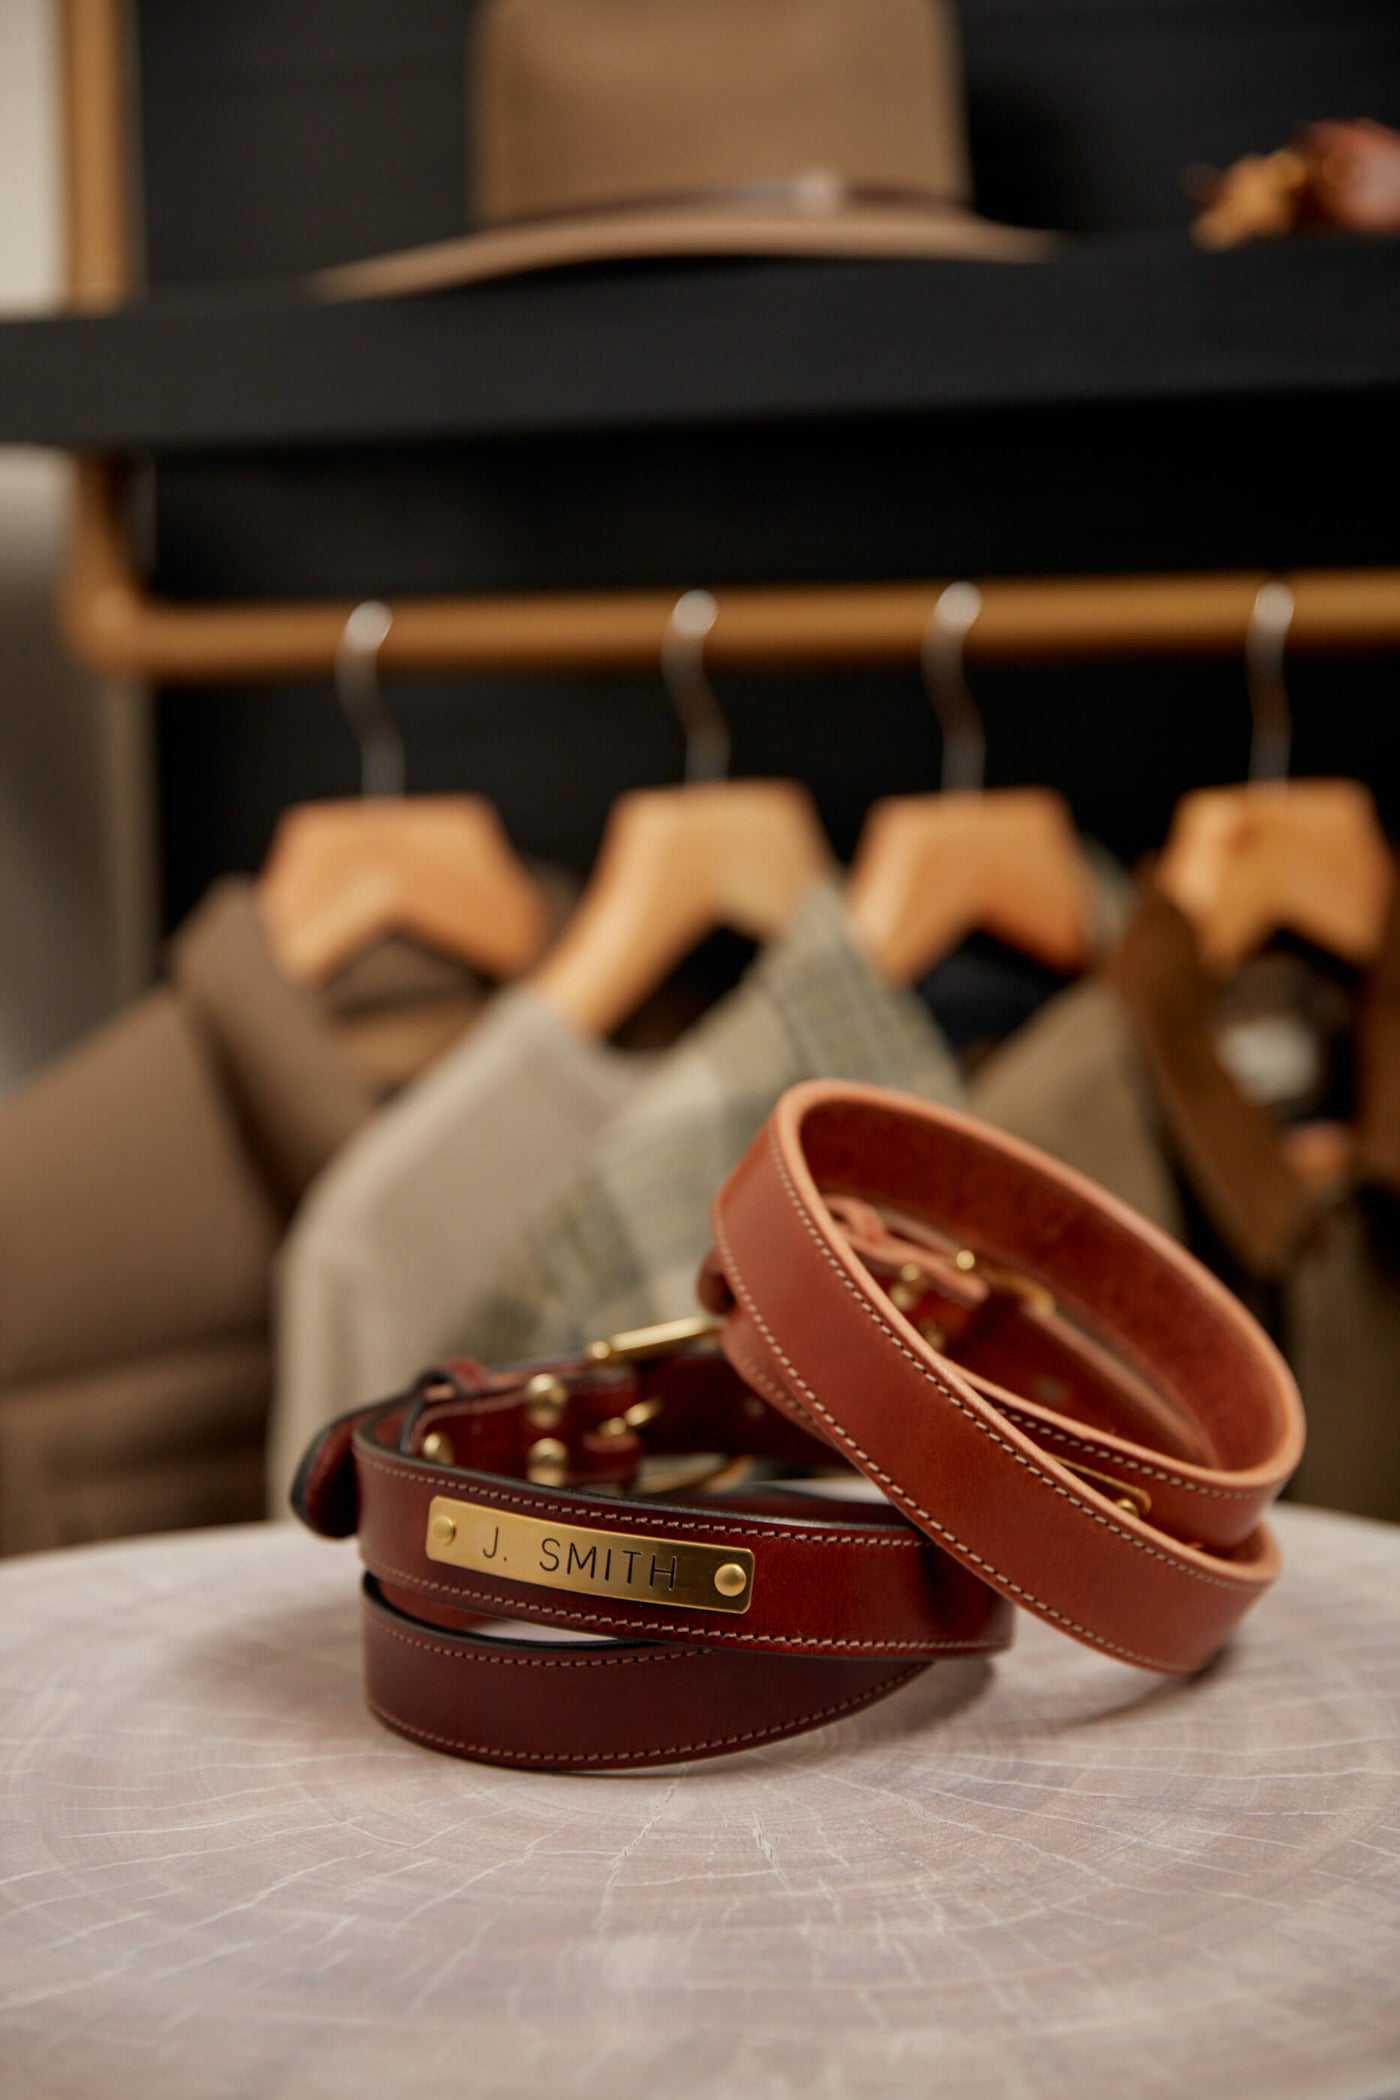 Traditional Stitched Belt – Clayton & Crume